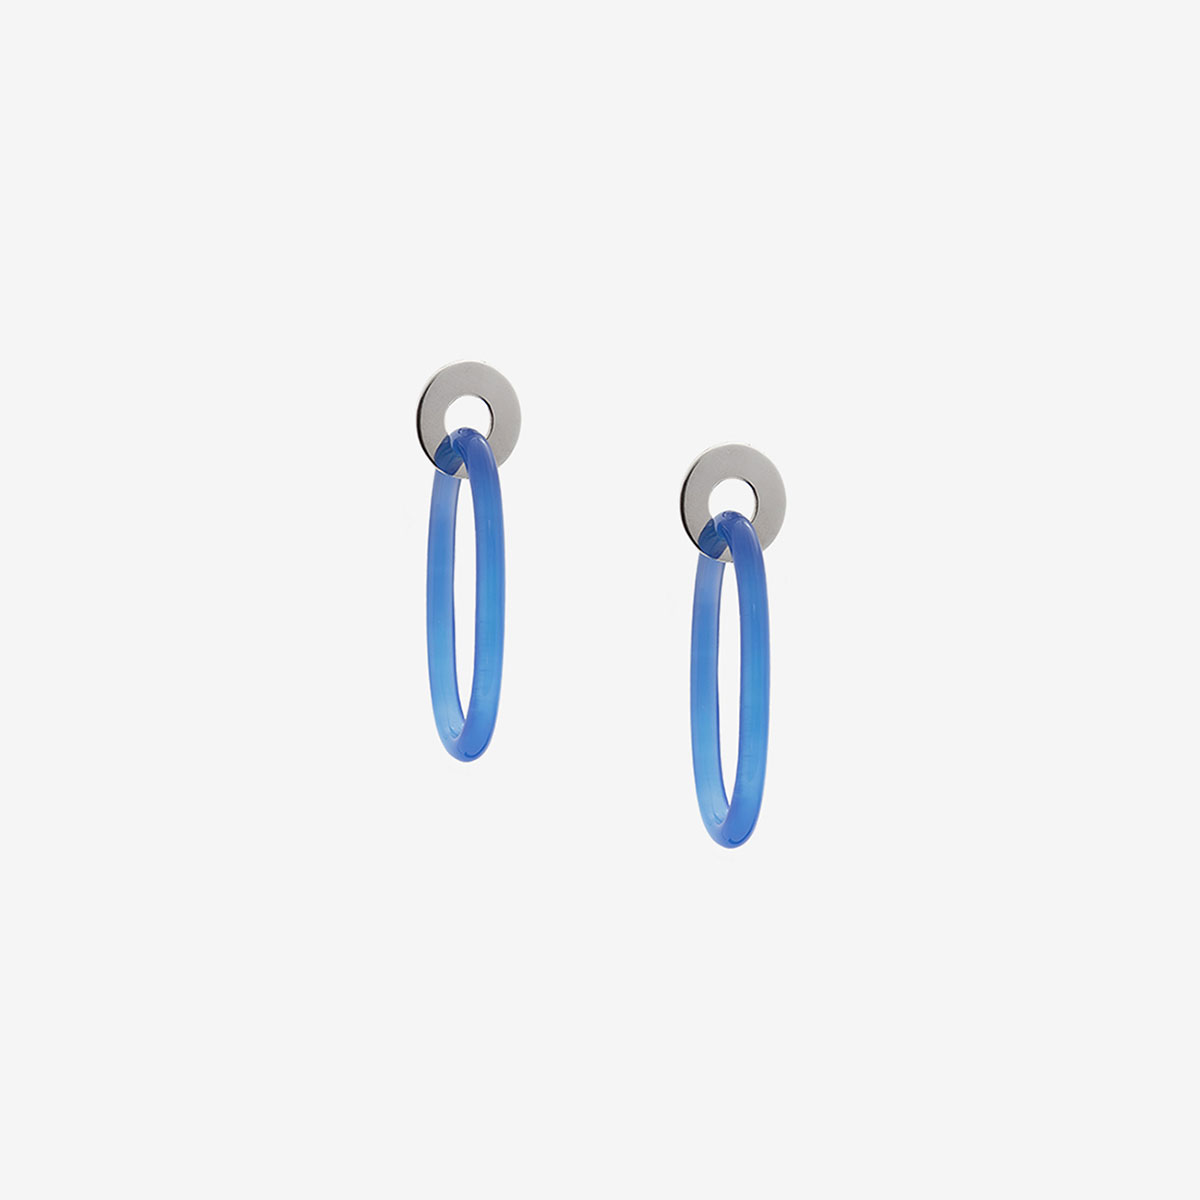 handcrafted Oru earrings in sterling silver and blue agate designed by Belen Bajo